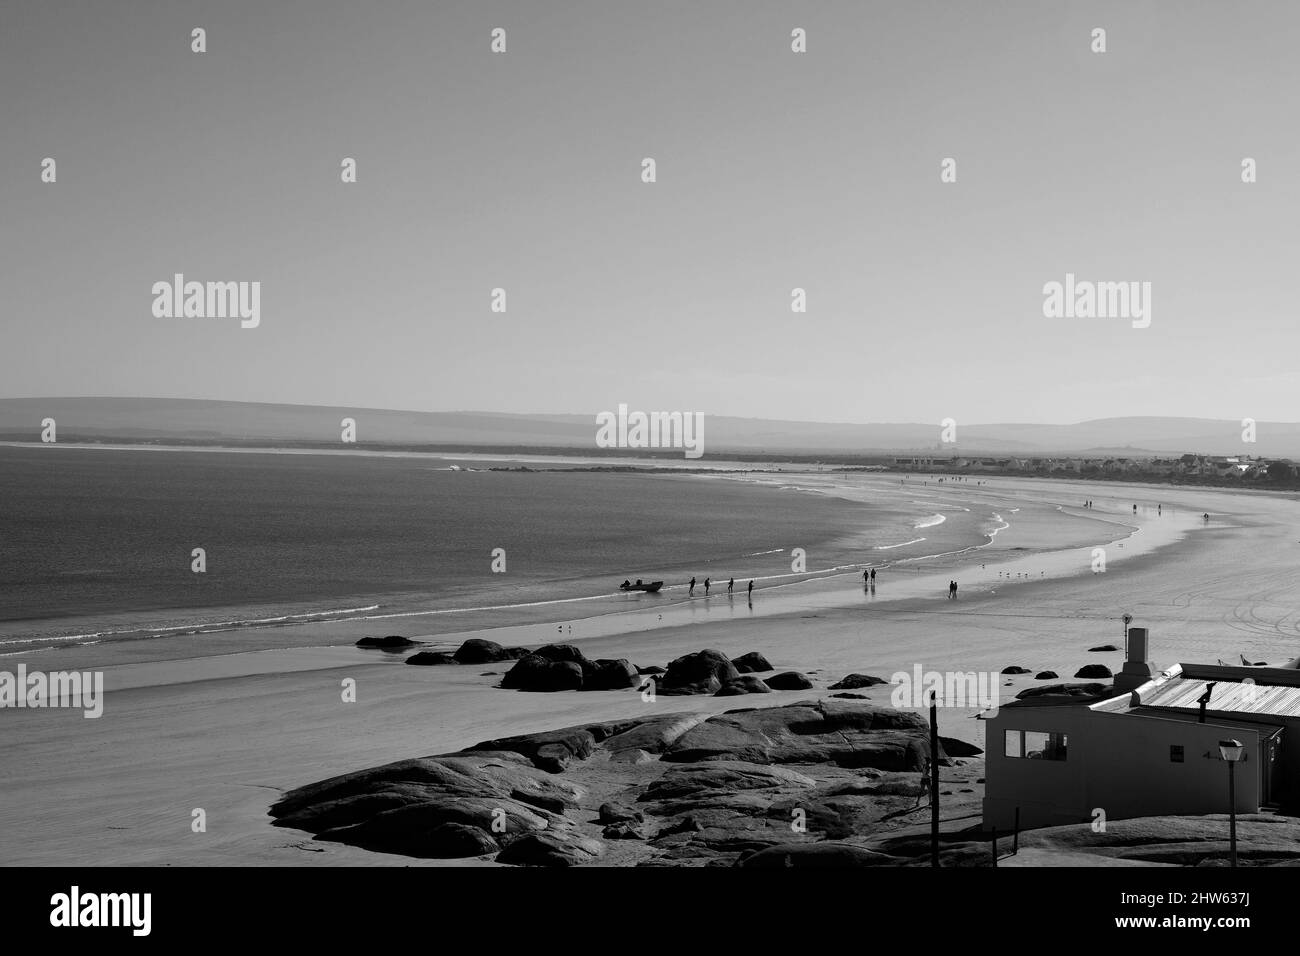 Black and white photo of people walking on the beach at Paternoster, West Coast, South Africa. Stock Photo